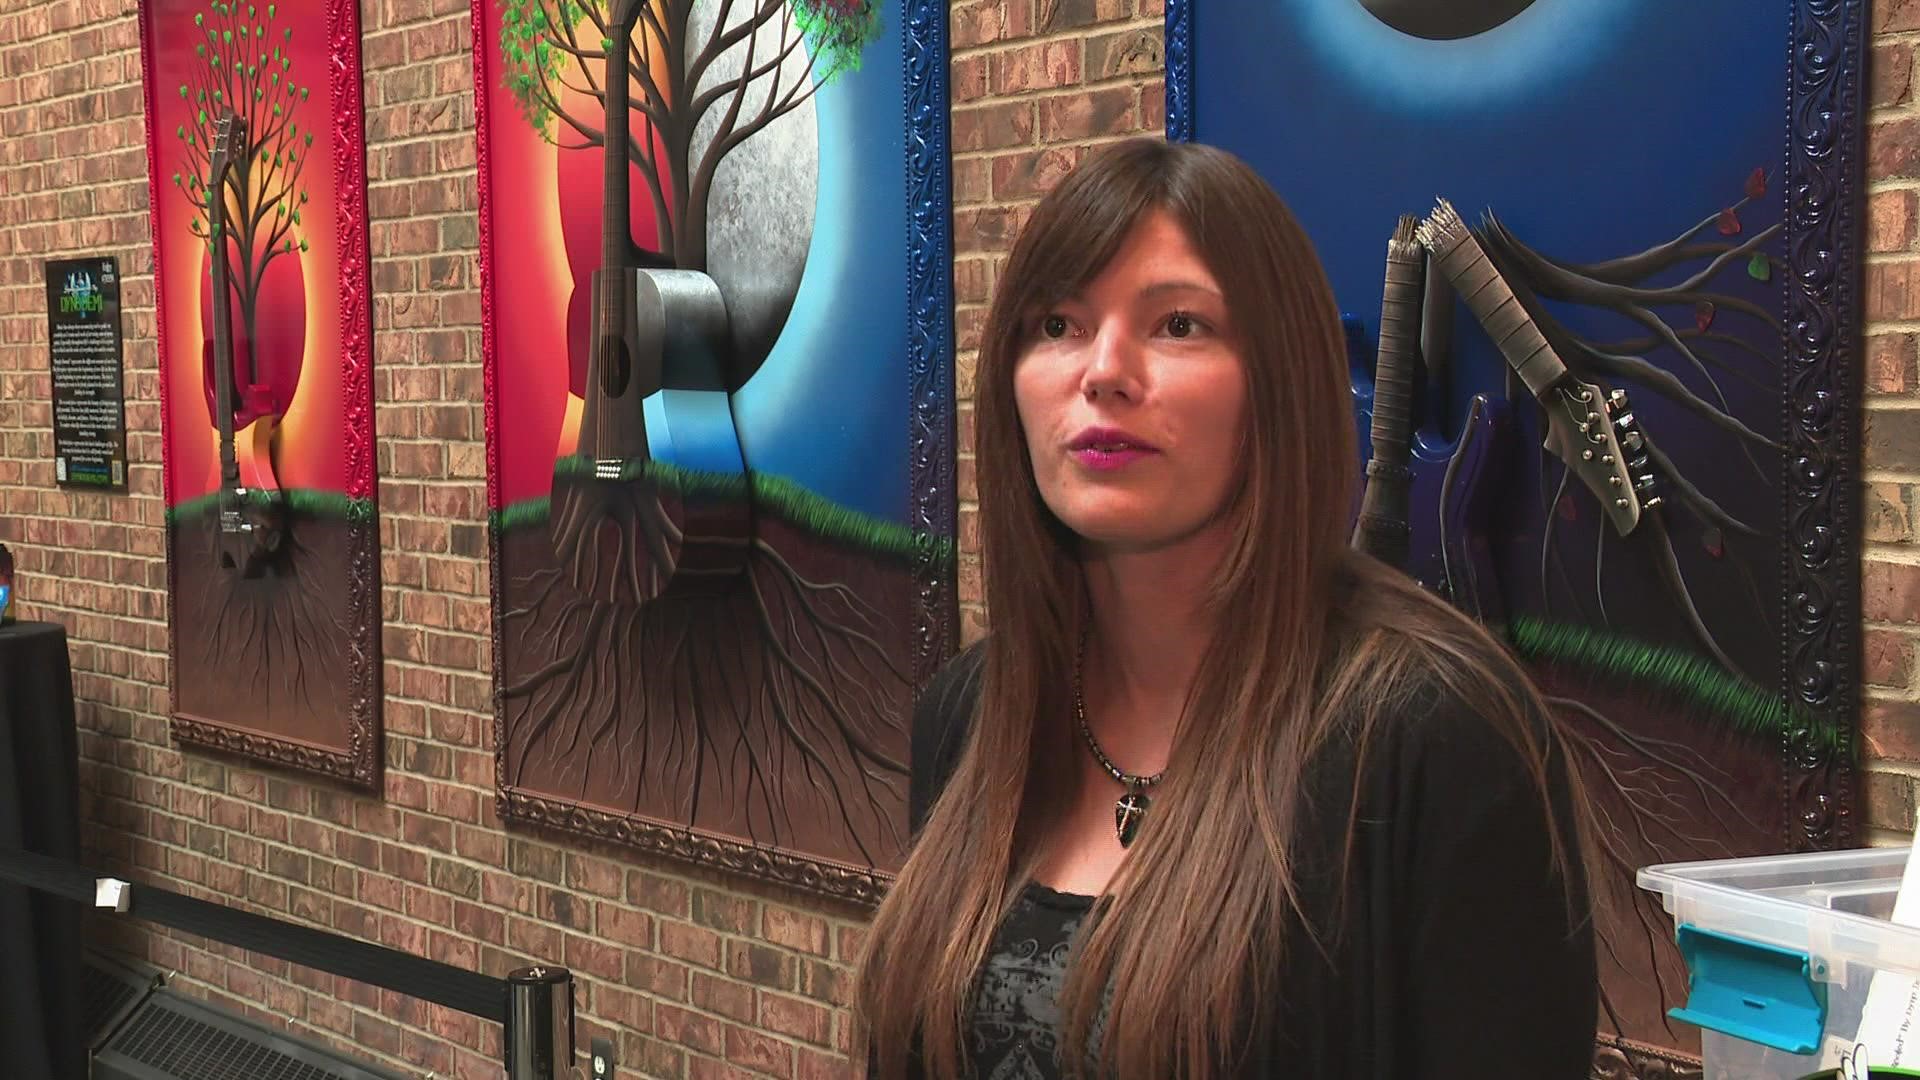 Artist Dyno Demi Heitzman says she has always used music to guide her creativity.